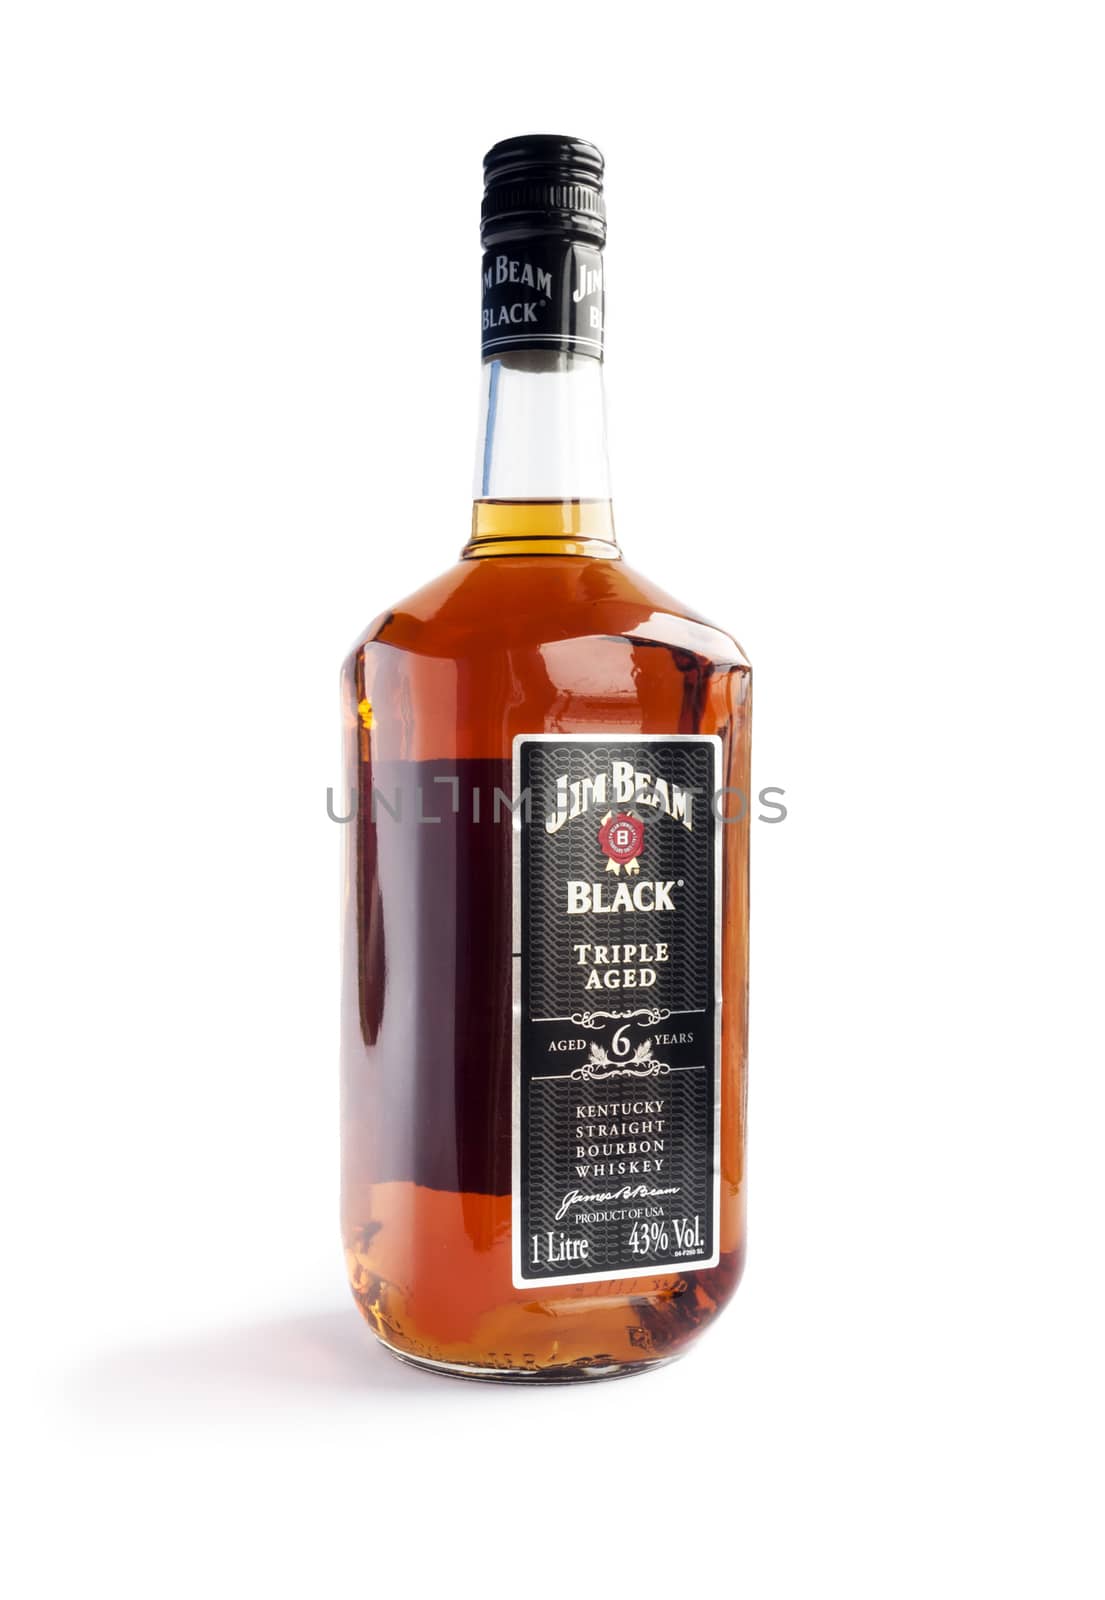 Bucharest, Romania - Jan 24, 2014: A bottle of Jim Beam Black isolated on white background. Jim Beam is an American brand of bourbon whiskey produced in Clermont, Kentucky. It was one of the best selling brands of bourbon in the world in 2008.